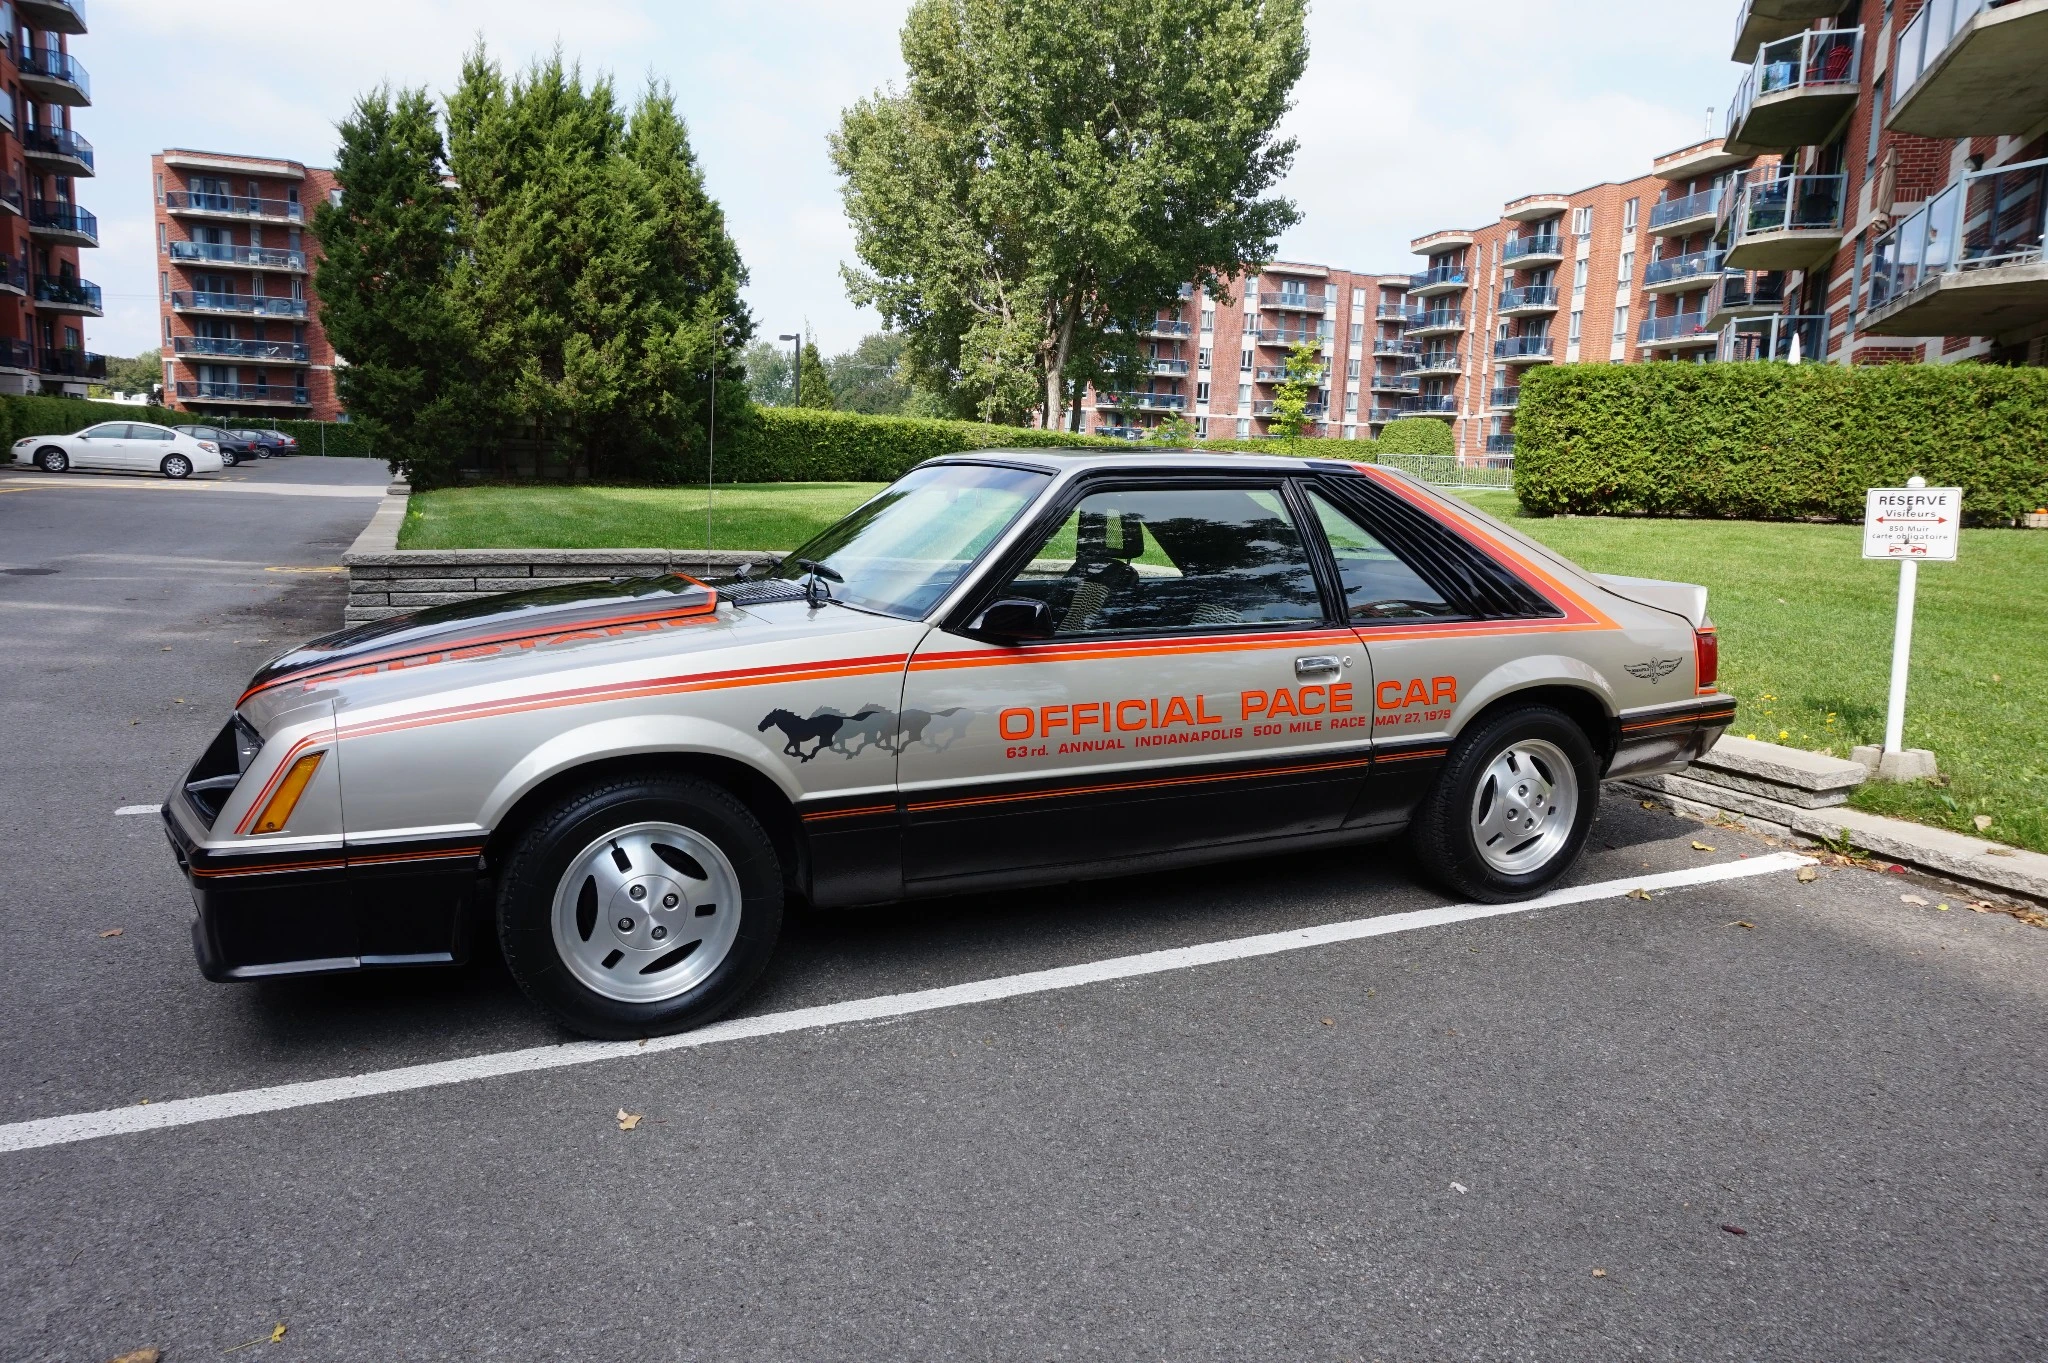 Mustang Of The Day: 1979 Ford Mustang Indianapolis Pace Car